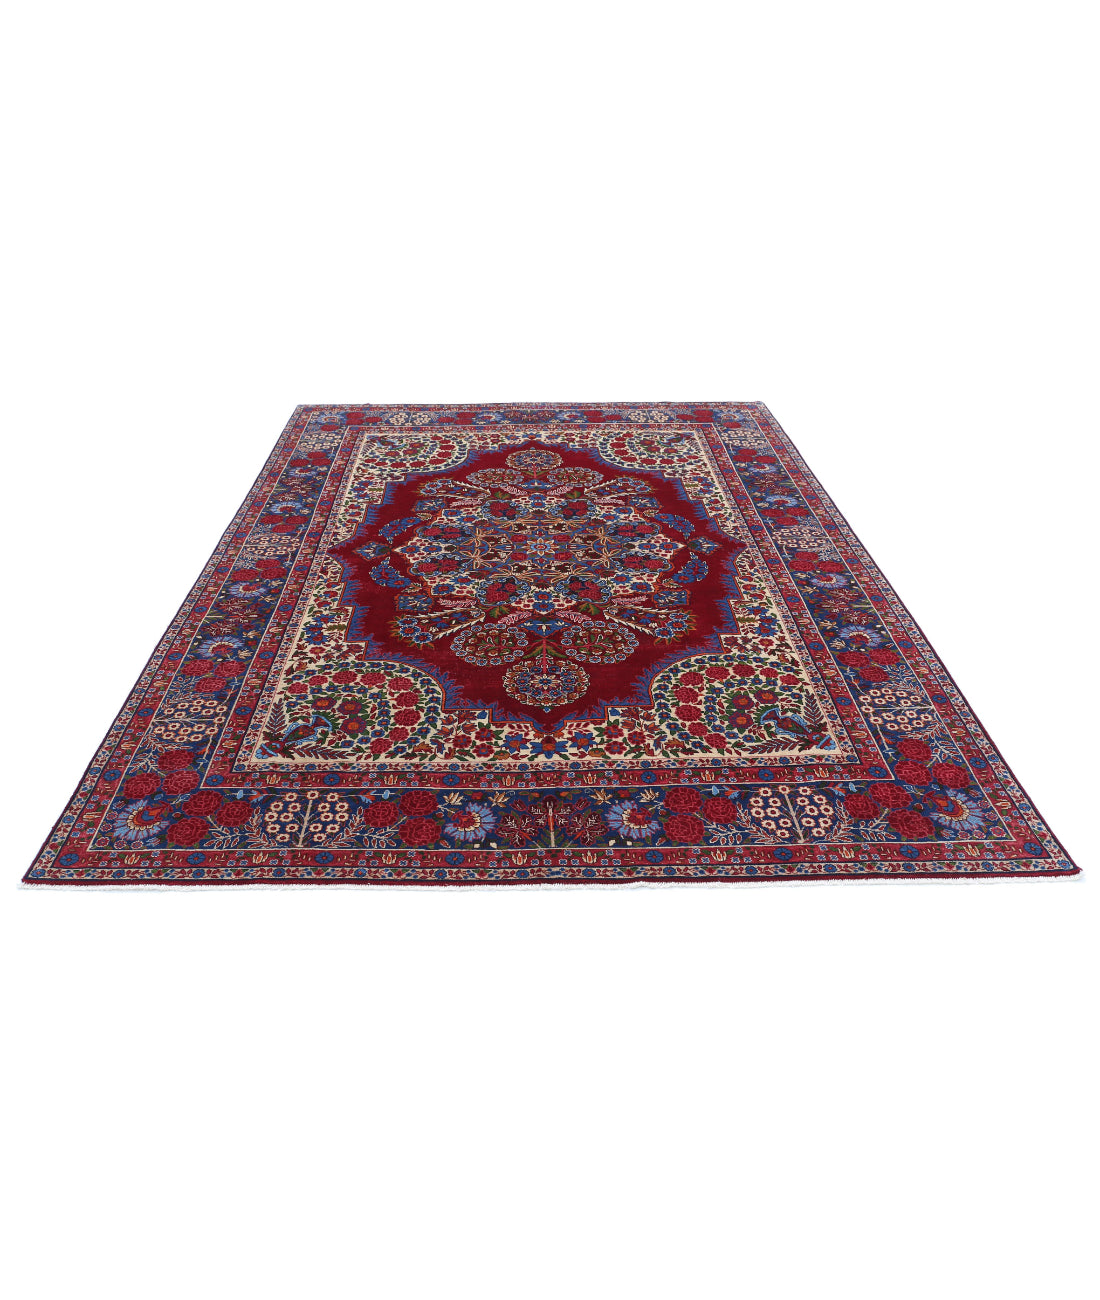 Hand Knotted Persian Kerman Wool Rug - 6'11'' x 9'9'' 6'11'' x 9'9'' (208 X 293) / Red / Blue